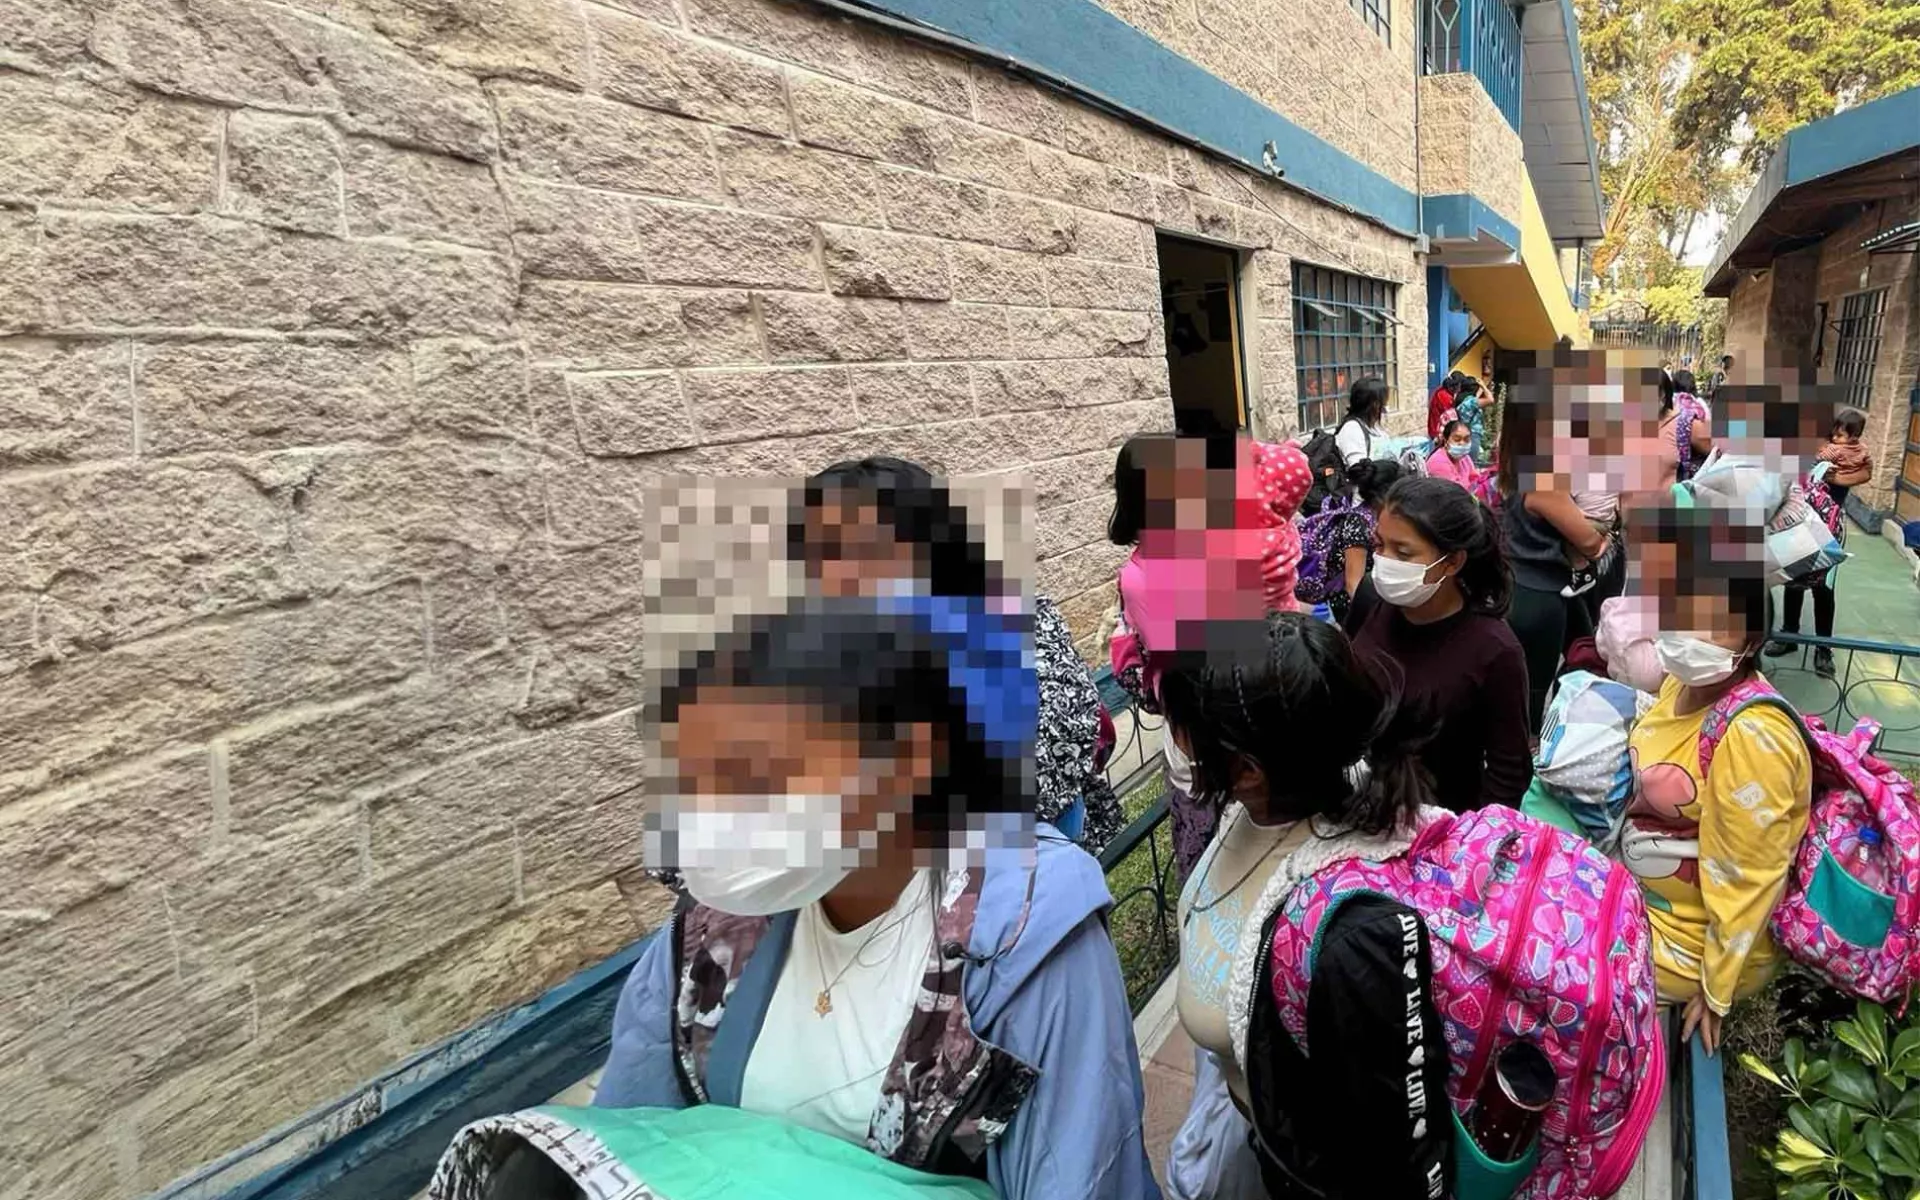 Guatemala Emergency Evacuation due to toxic chemicals found in a nearby warehouse | Donate Now